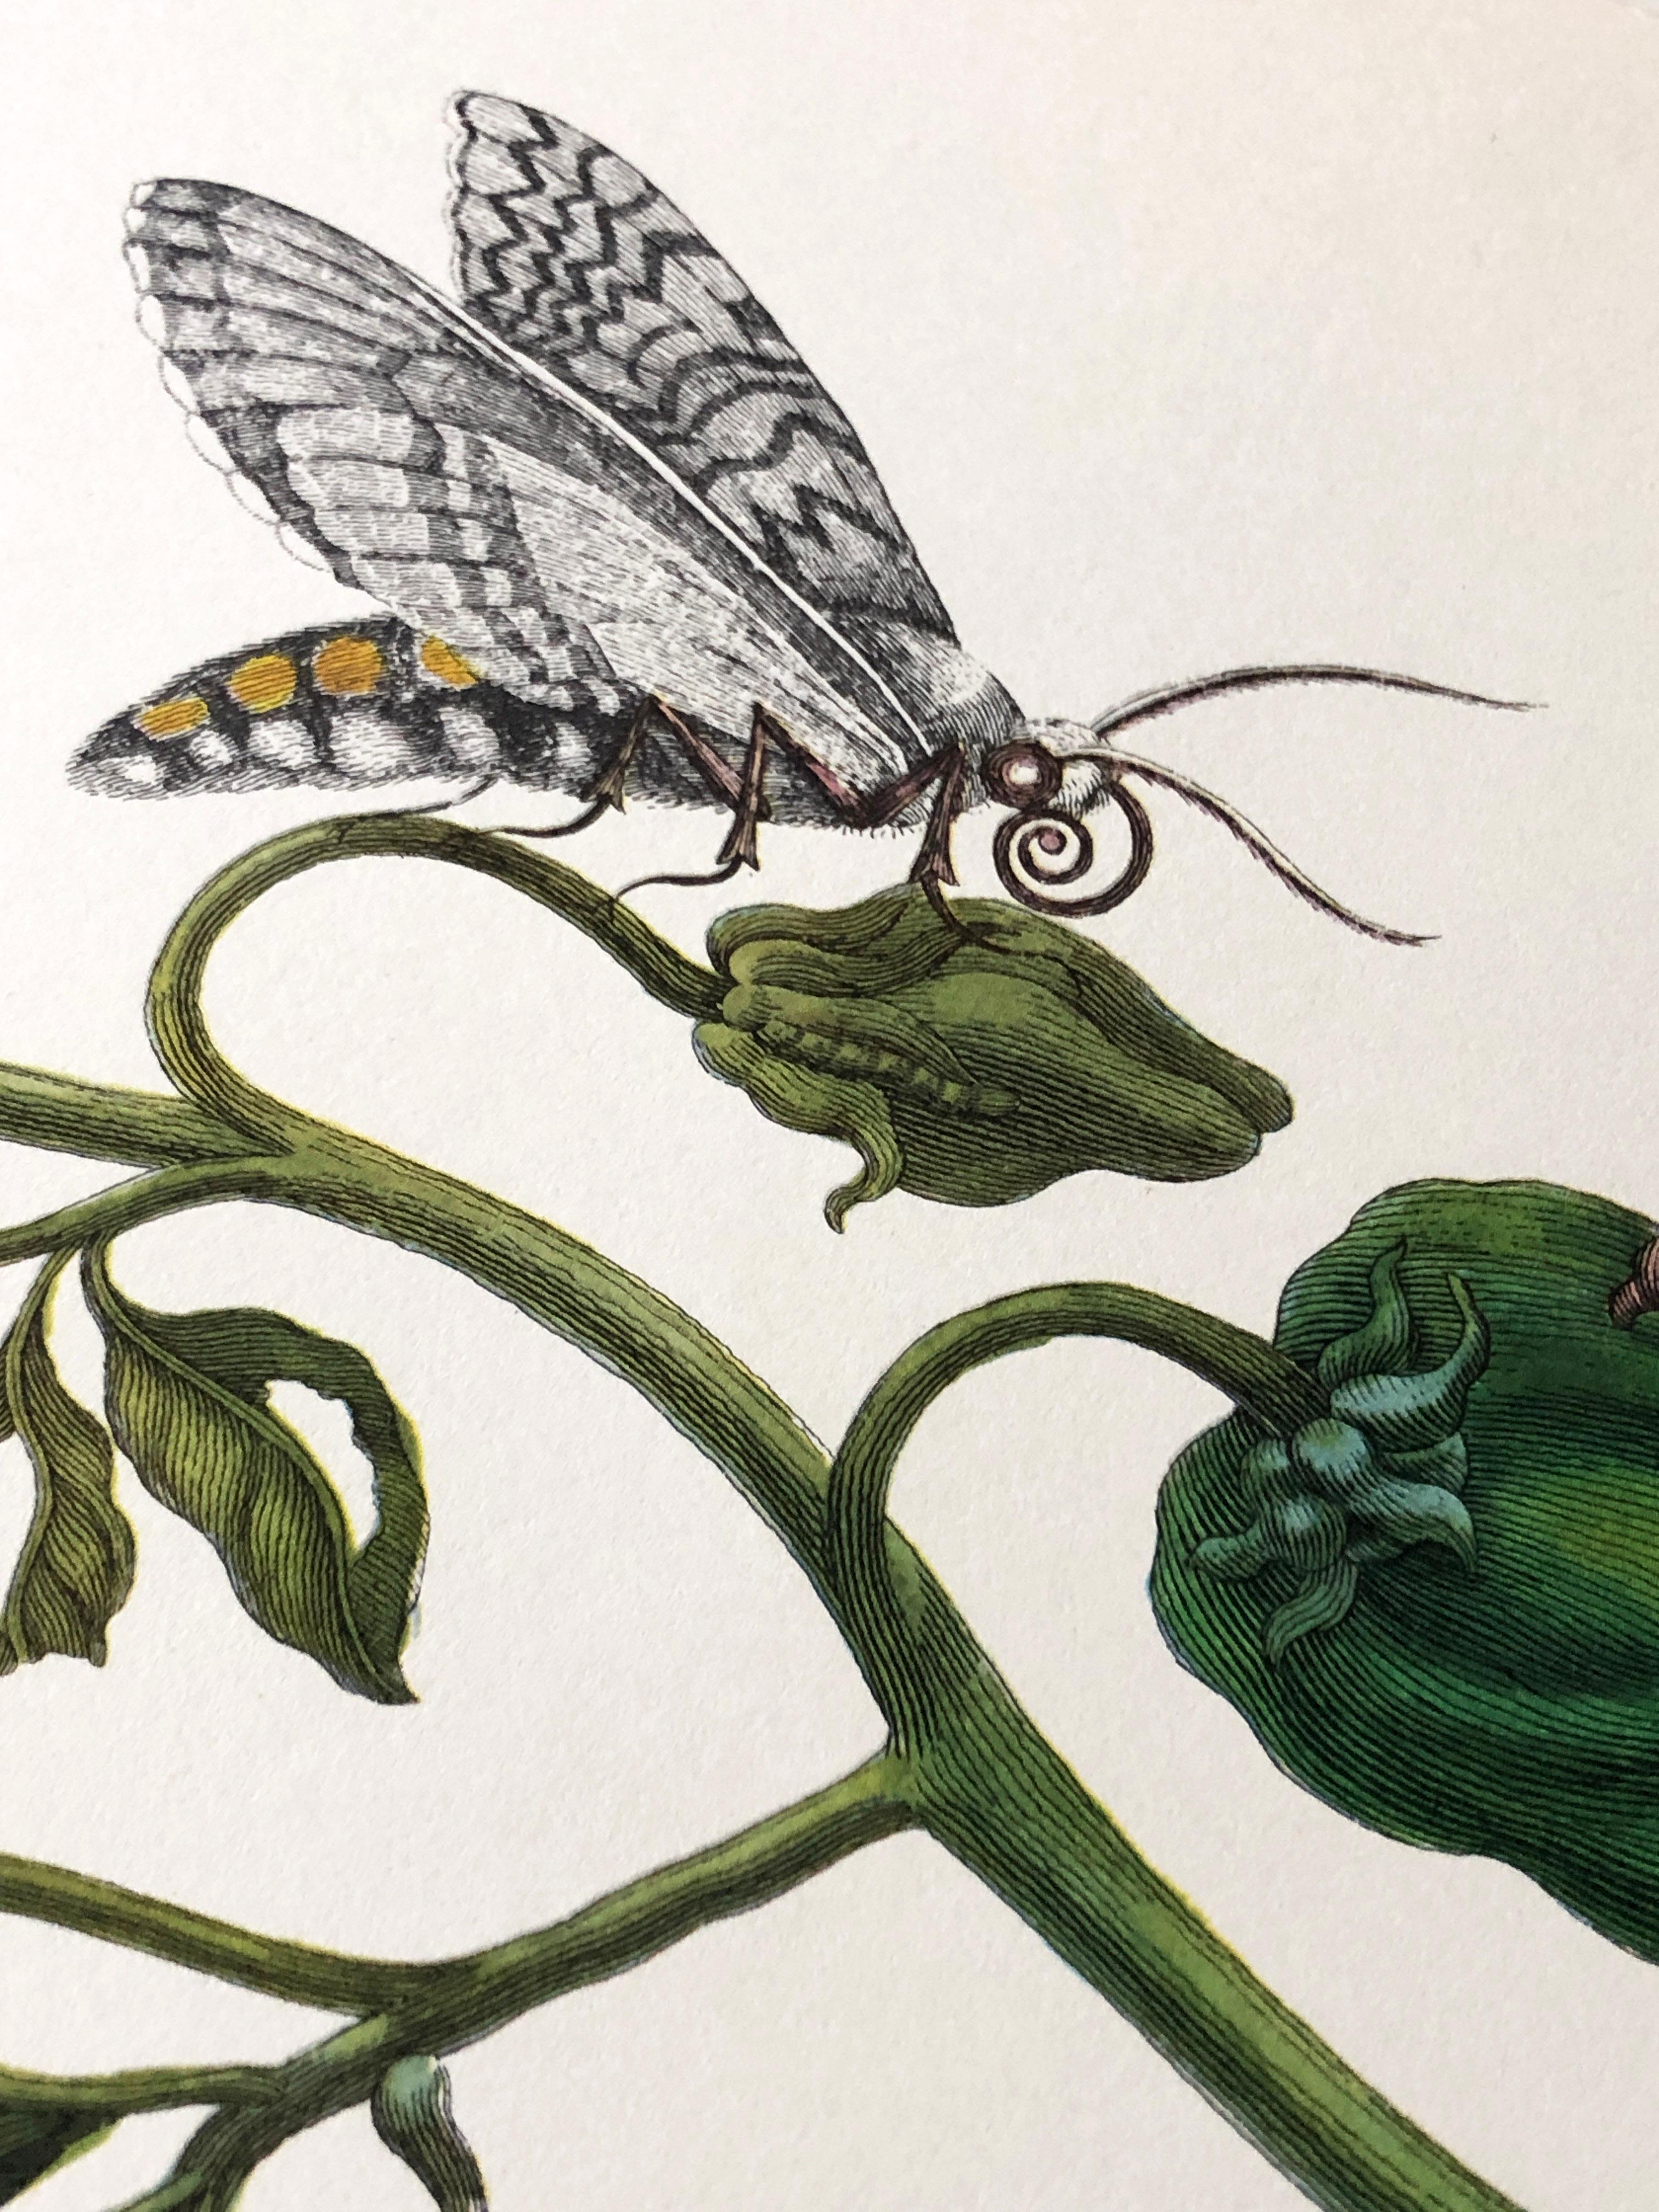 Paper Maria Sibylla Merian - P. Sluyter - Peppers and Hawkmoths Nr. 55 For Sale